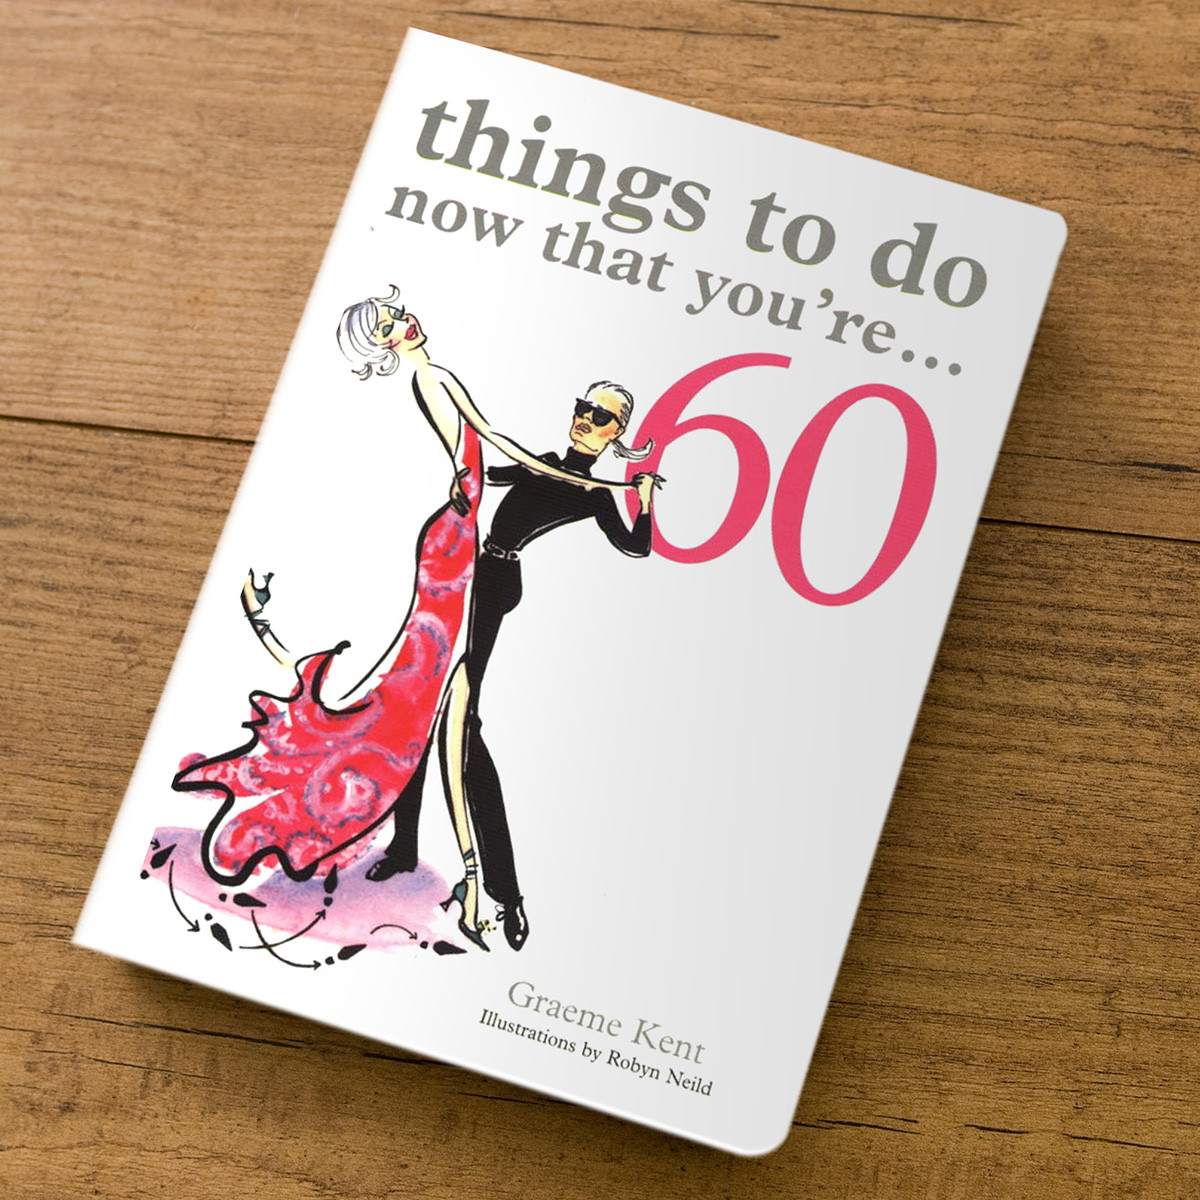 60th Birthday Gift
 Things To Do Now That You re 60 Gift Book 60th Birthday Gifts from GettingPersonal